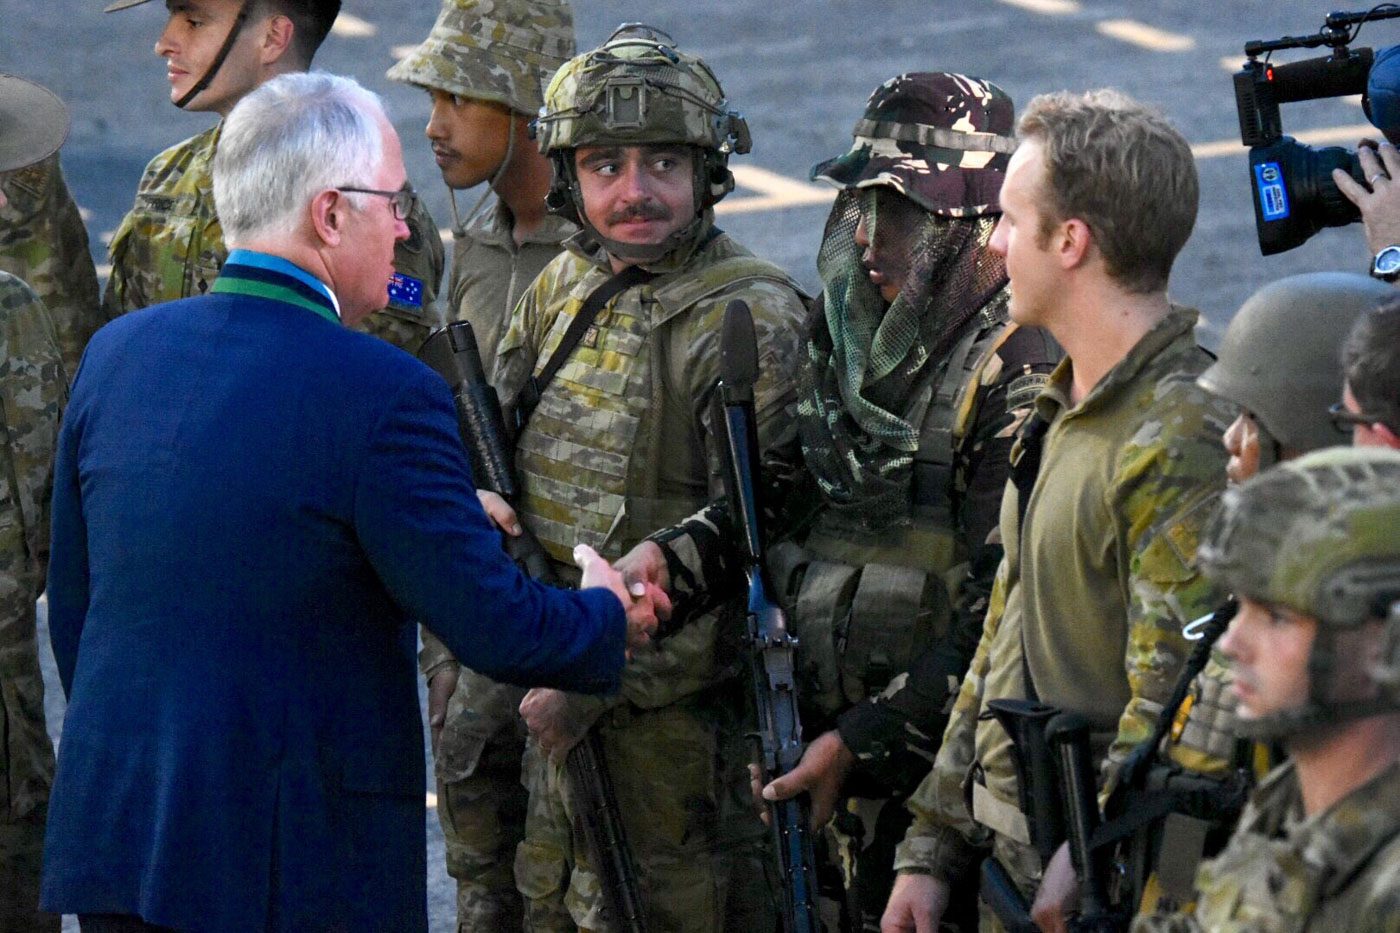 TALK TO MEN. Australian Prime Minister Malcolm Turnbull took the opportunity to talk to the Australian troops deployed in the Philippines 